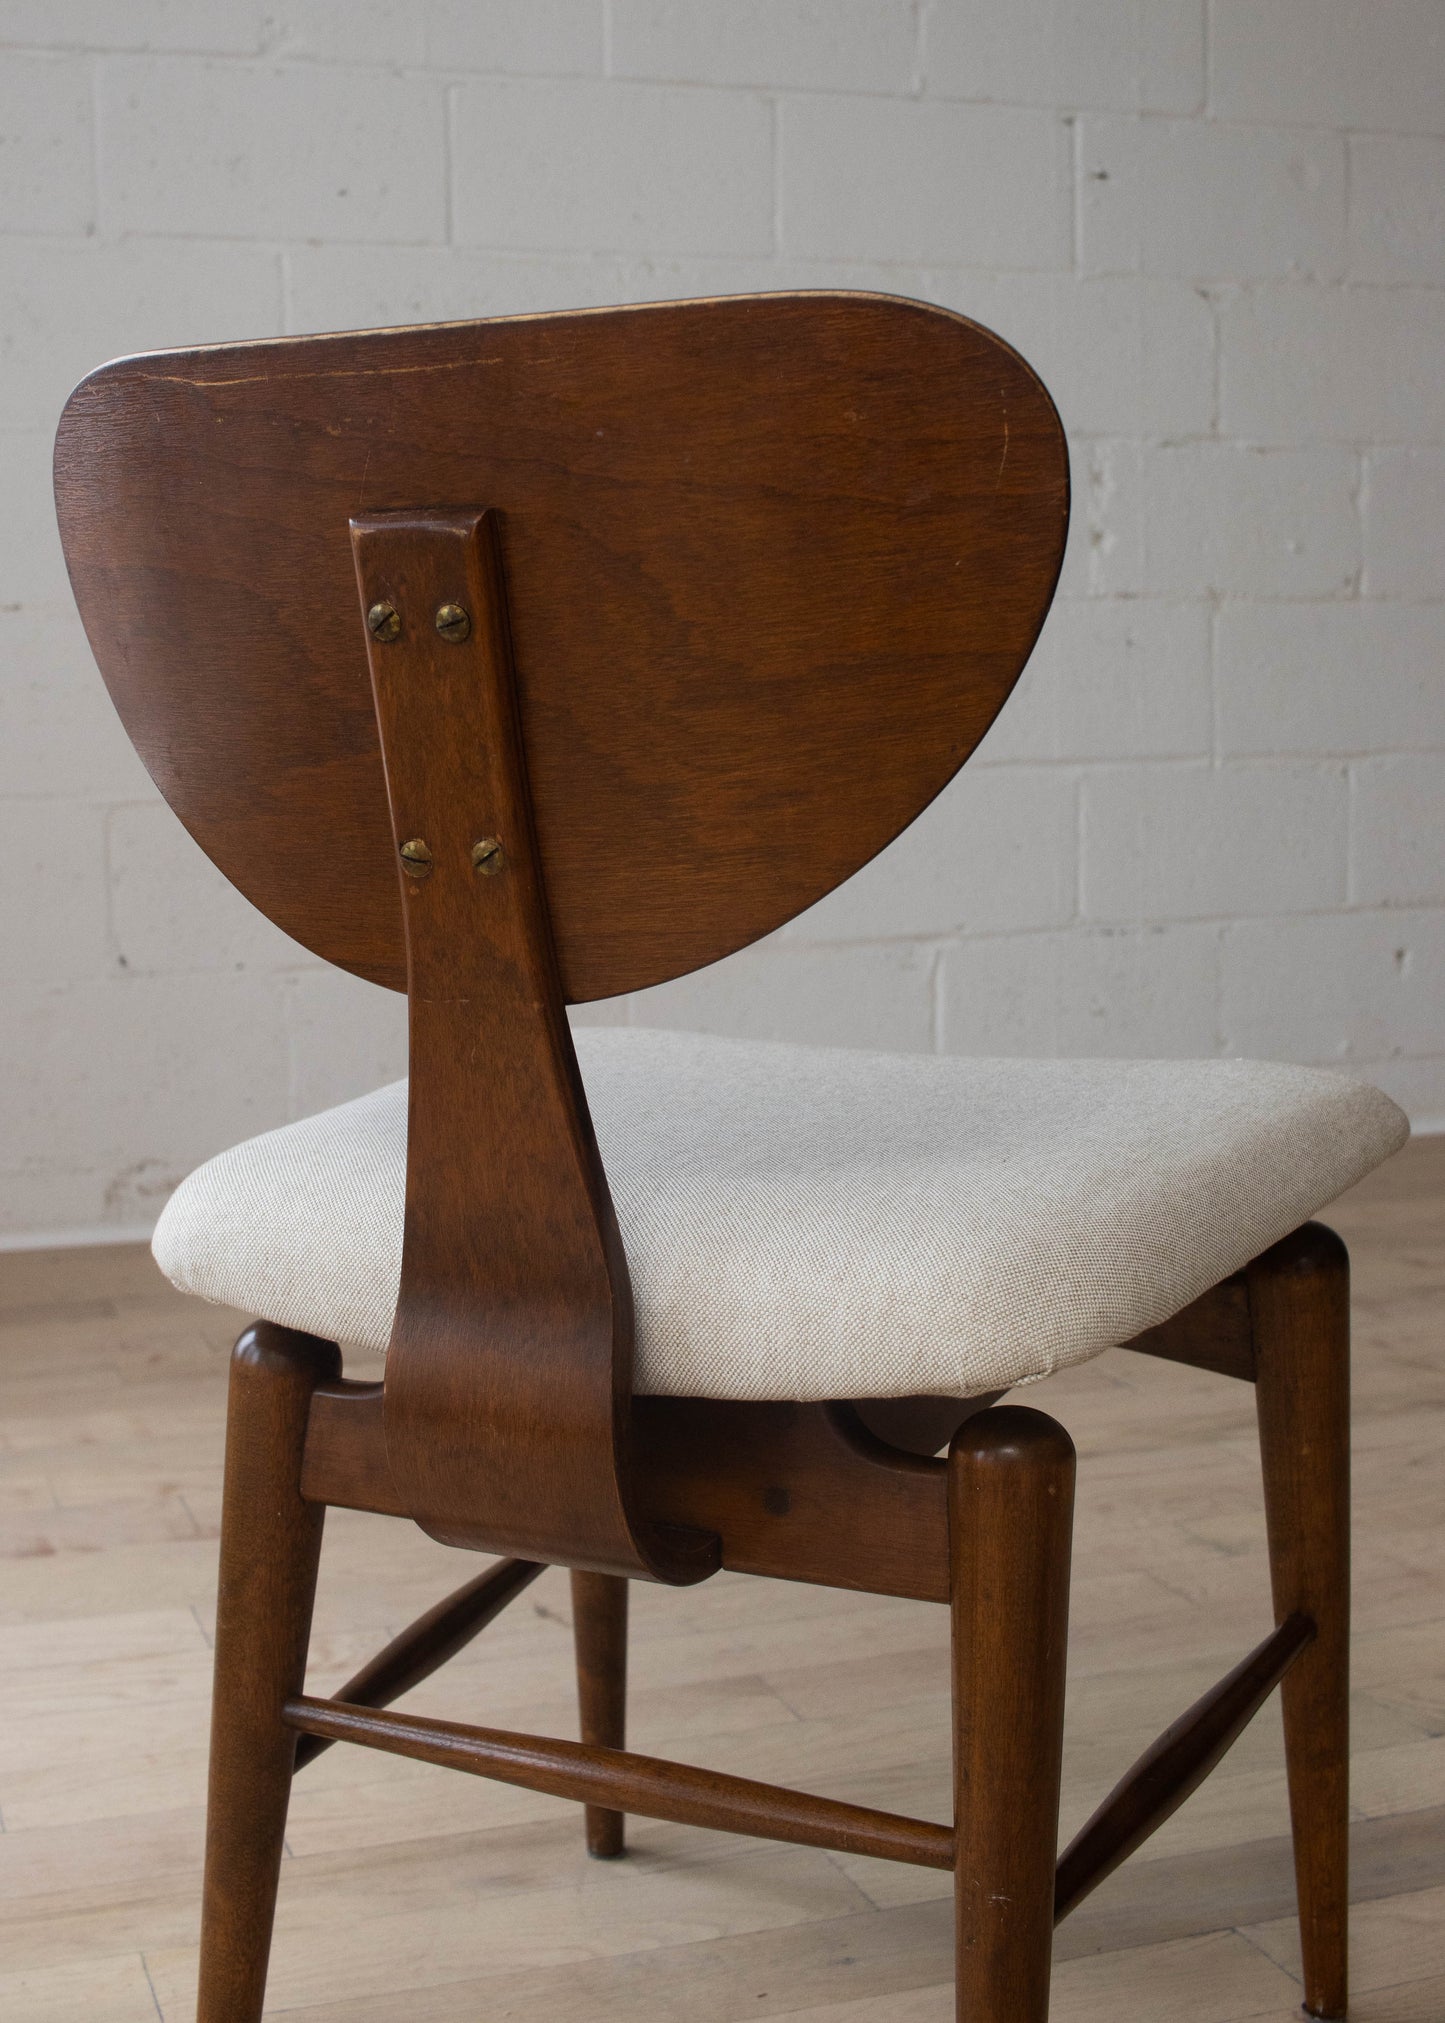 Vintage 1960s/1970s Mid-Century Modern Dining Chair